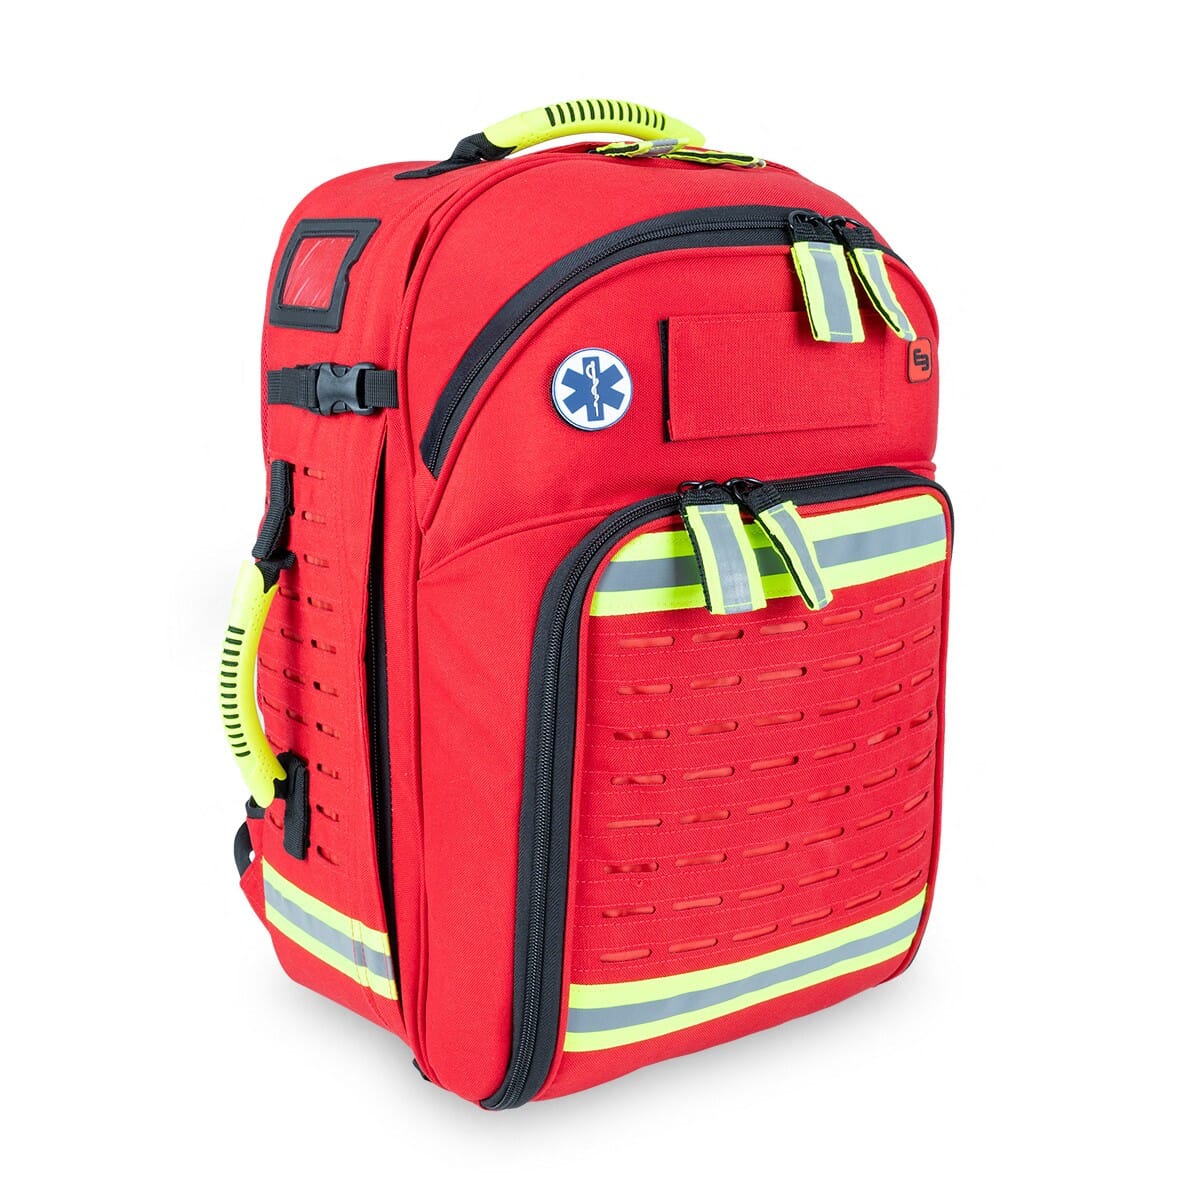 Paramedic Tactical Backpack - PARAMED'S EVO - Elite Bags